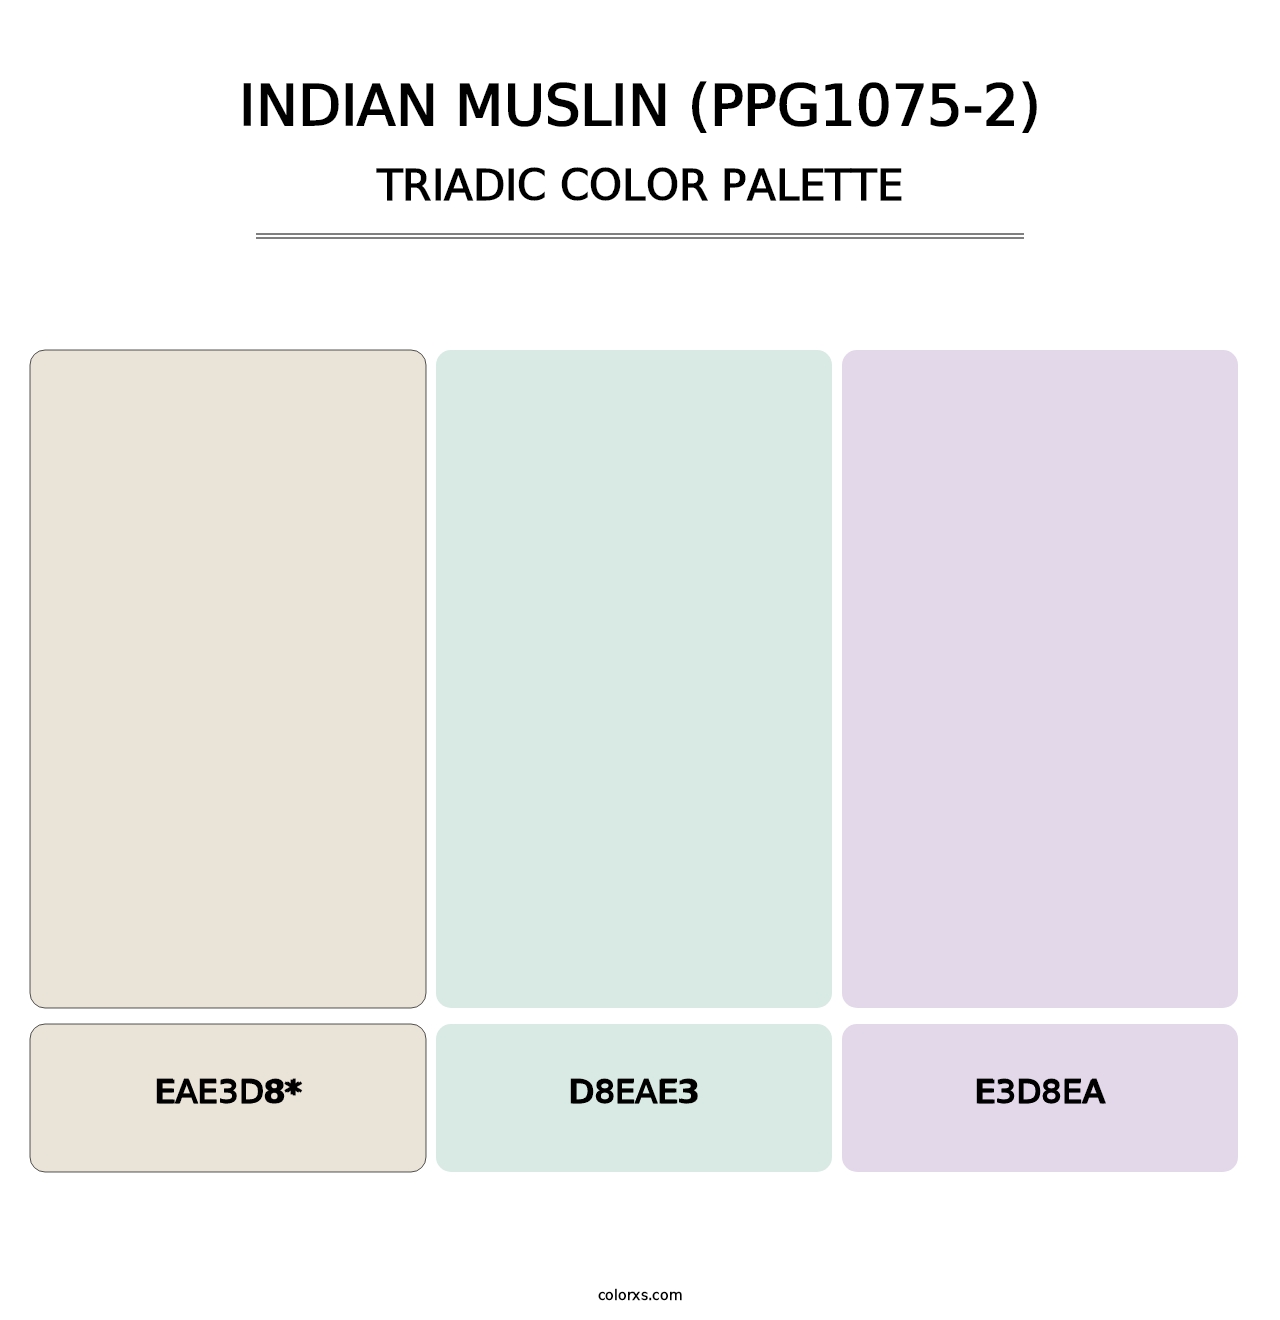 Indian Muslin (PPG1075-2) - Triadic Color Palette